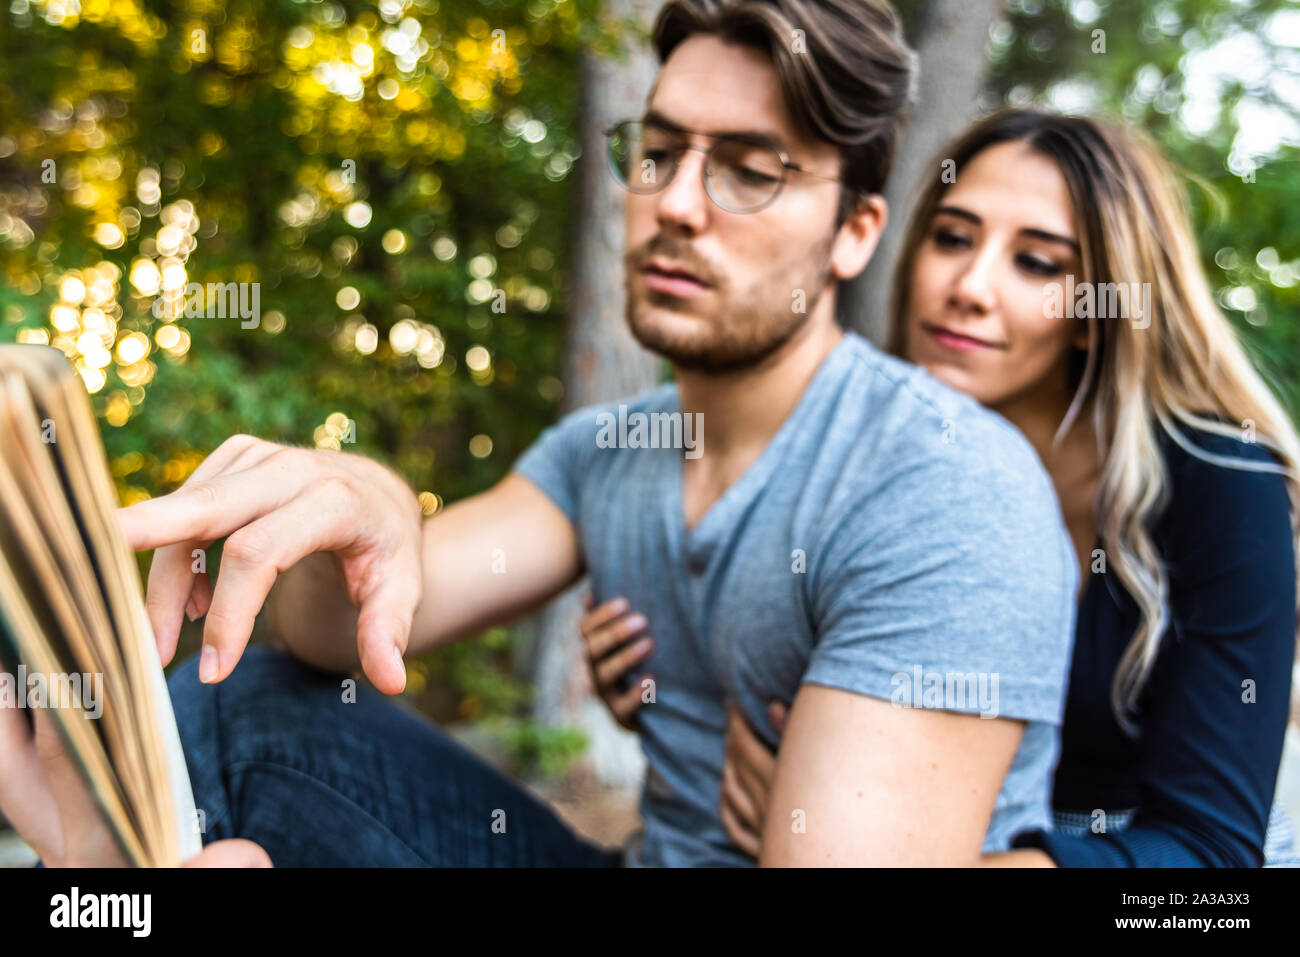 A man's hand pointing to a book, with couple embraced in the background out of focus, in a park. Stock Photo